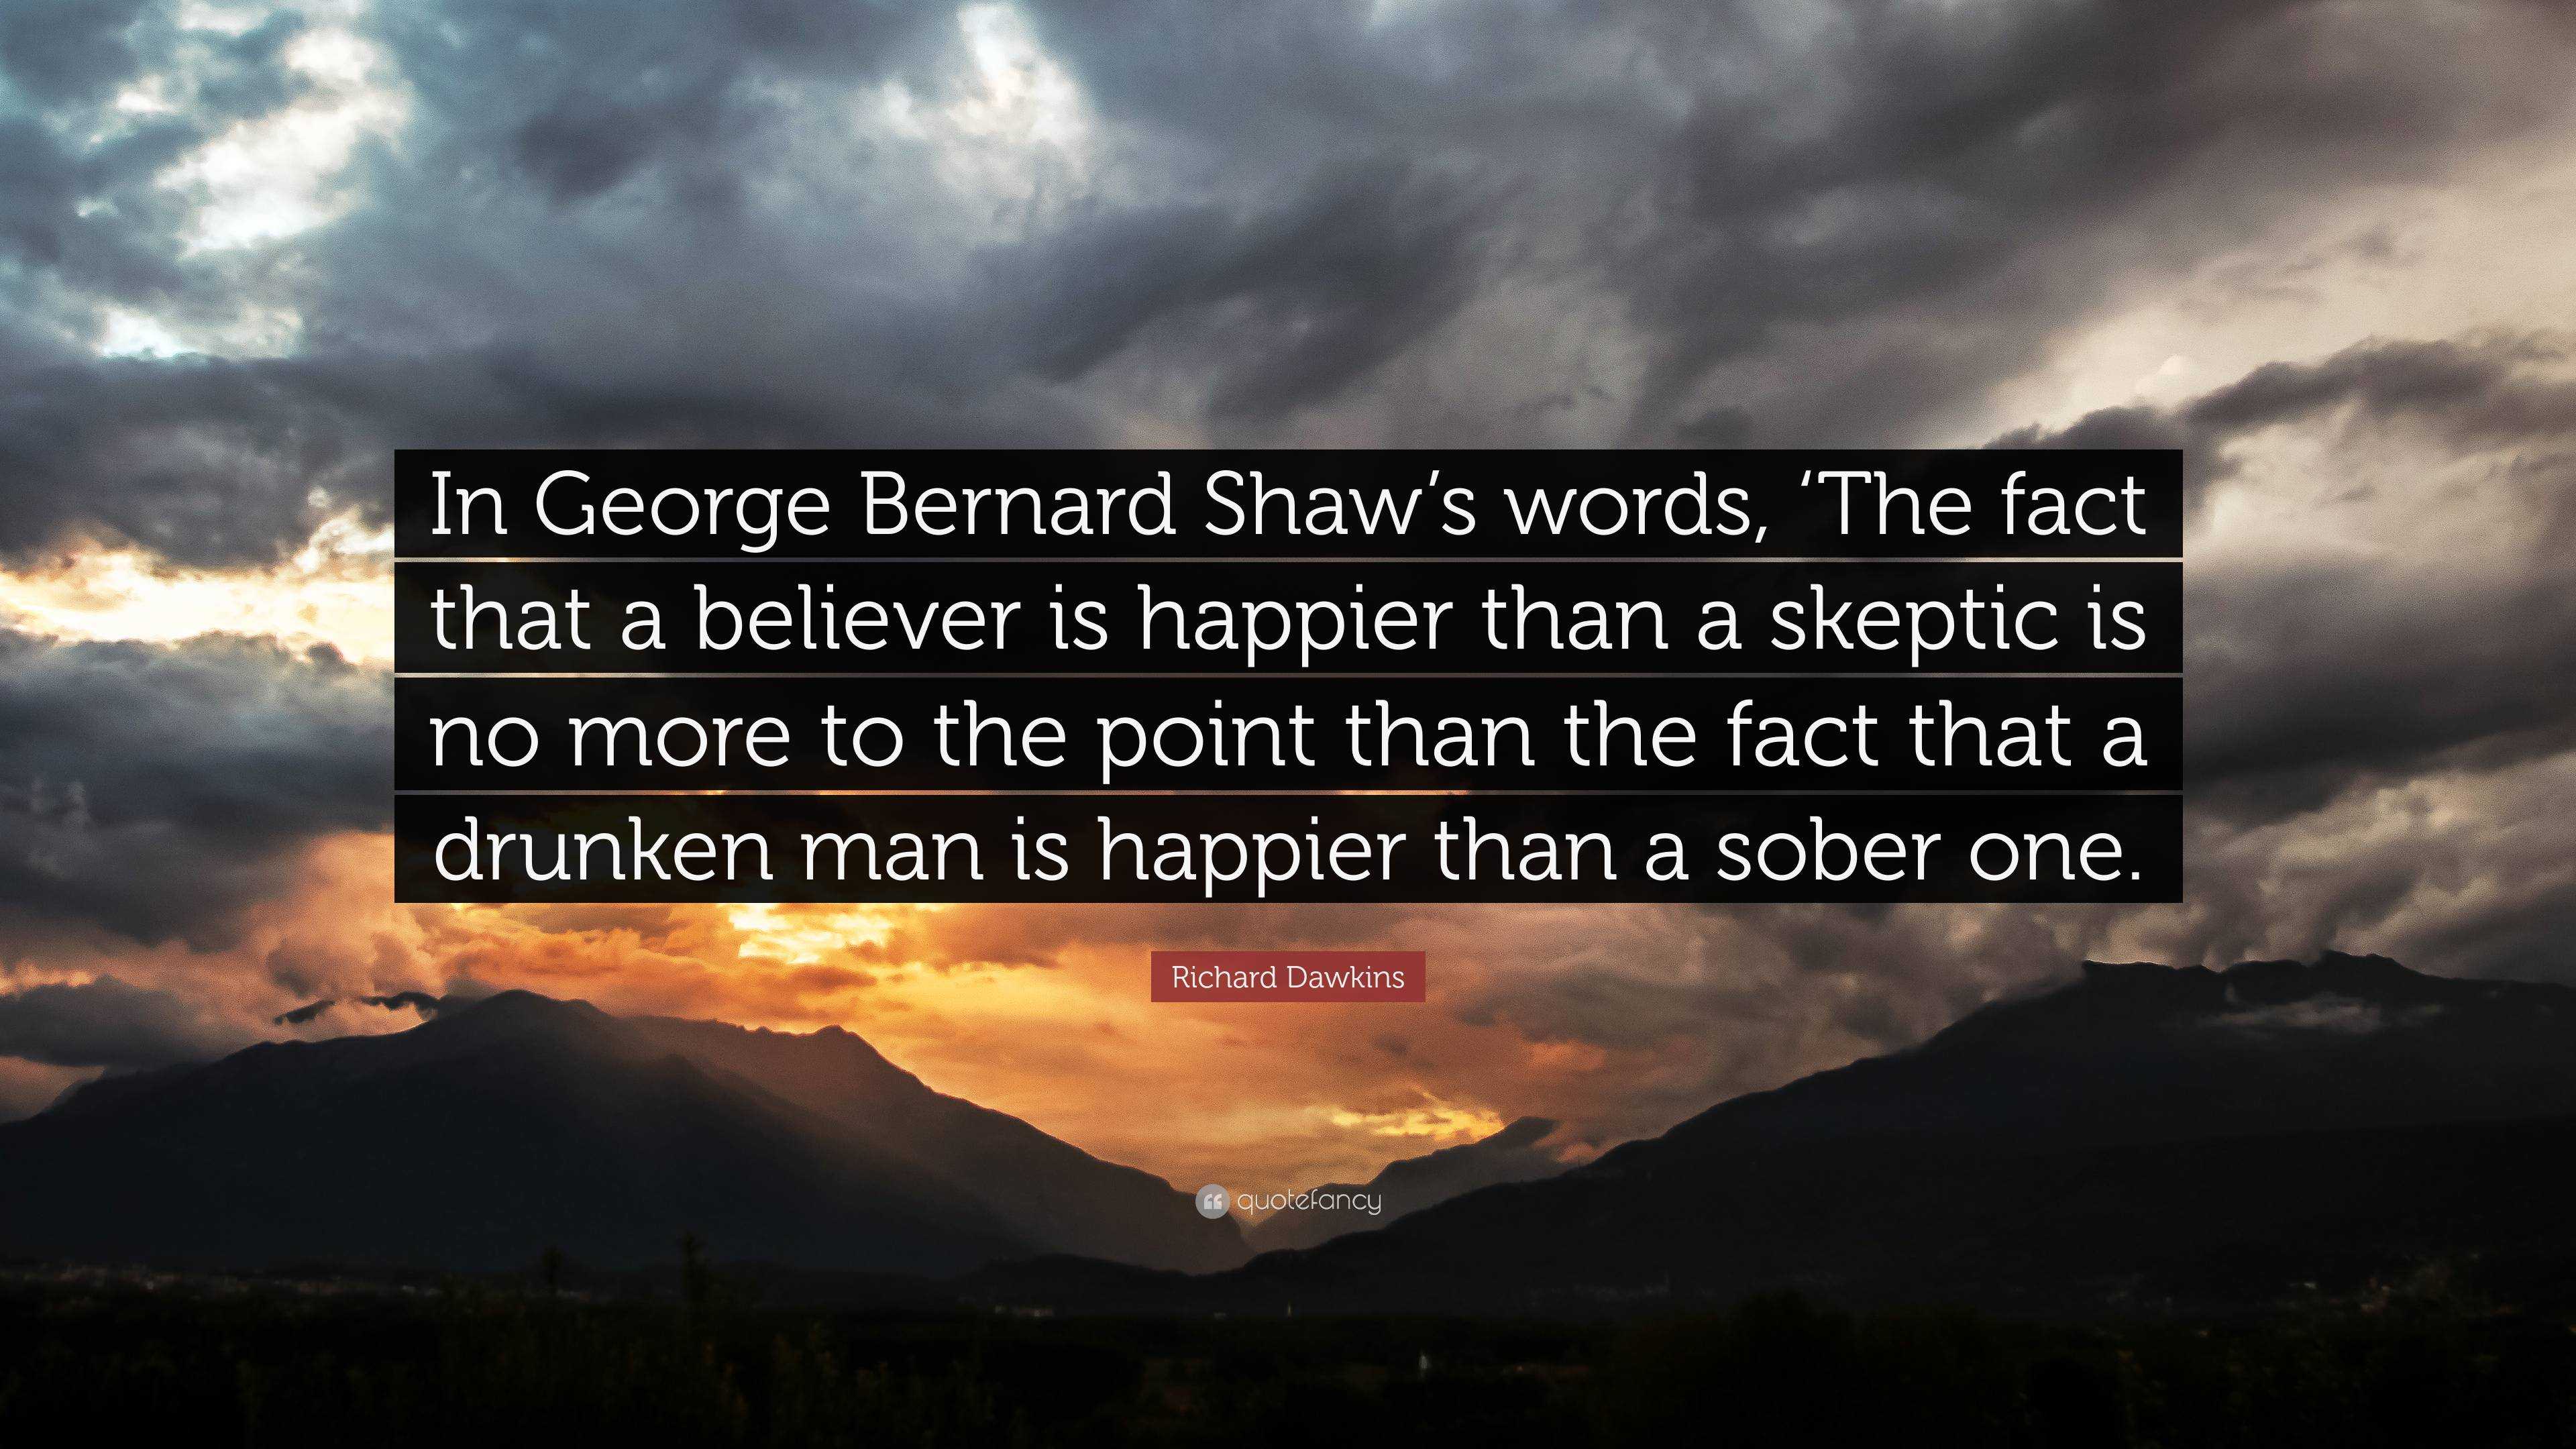 Richard Dawkins Quote In George Bernard Shaw S Words The Fact That A Believer Is Happier Than A Skeptic Is No More To The Point Than The Fac